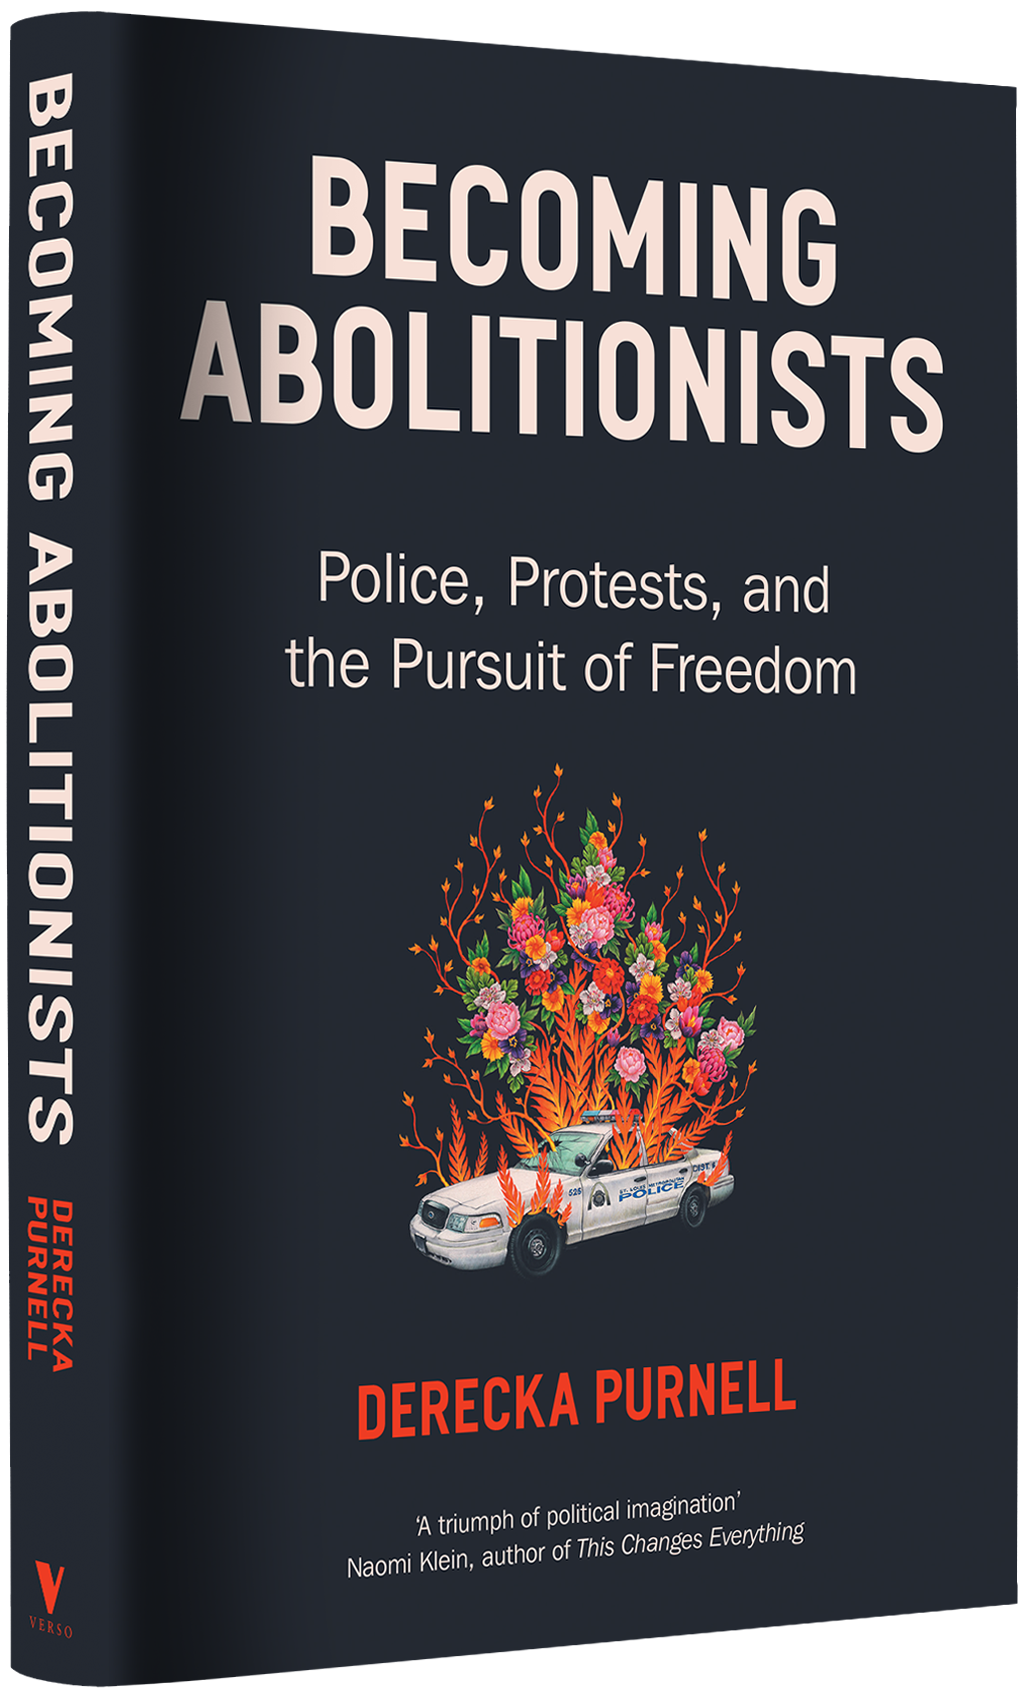 Becoming Abolitionists: Police, Protests, and the Pursuit of Freedom - Derecka Purnell [USED]